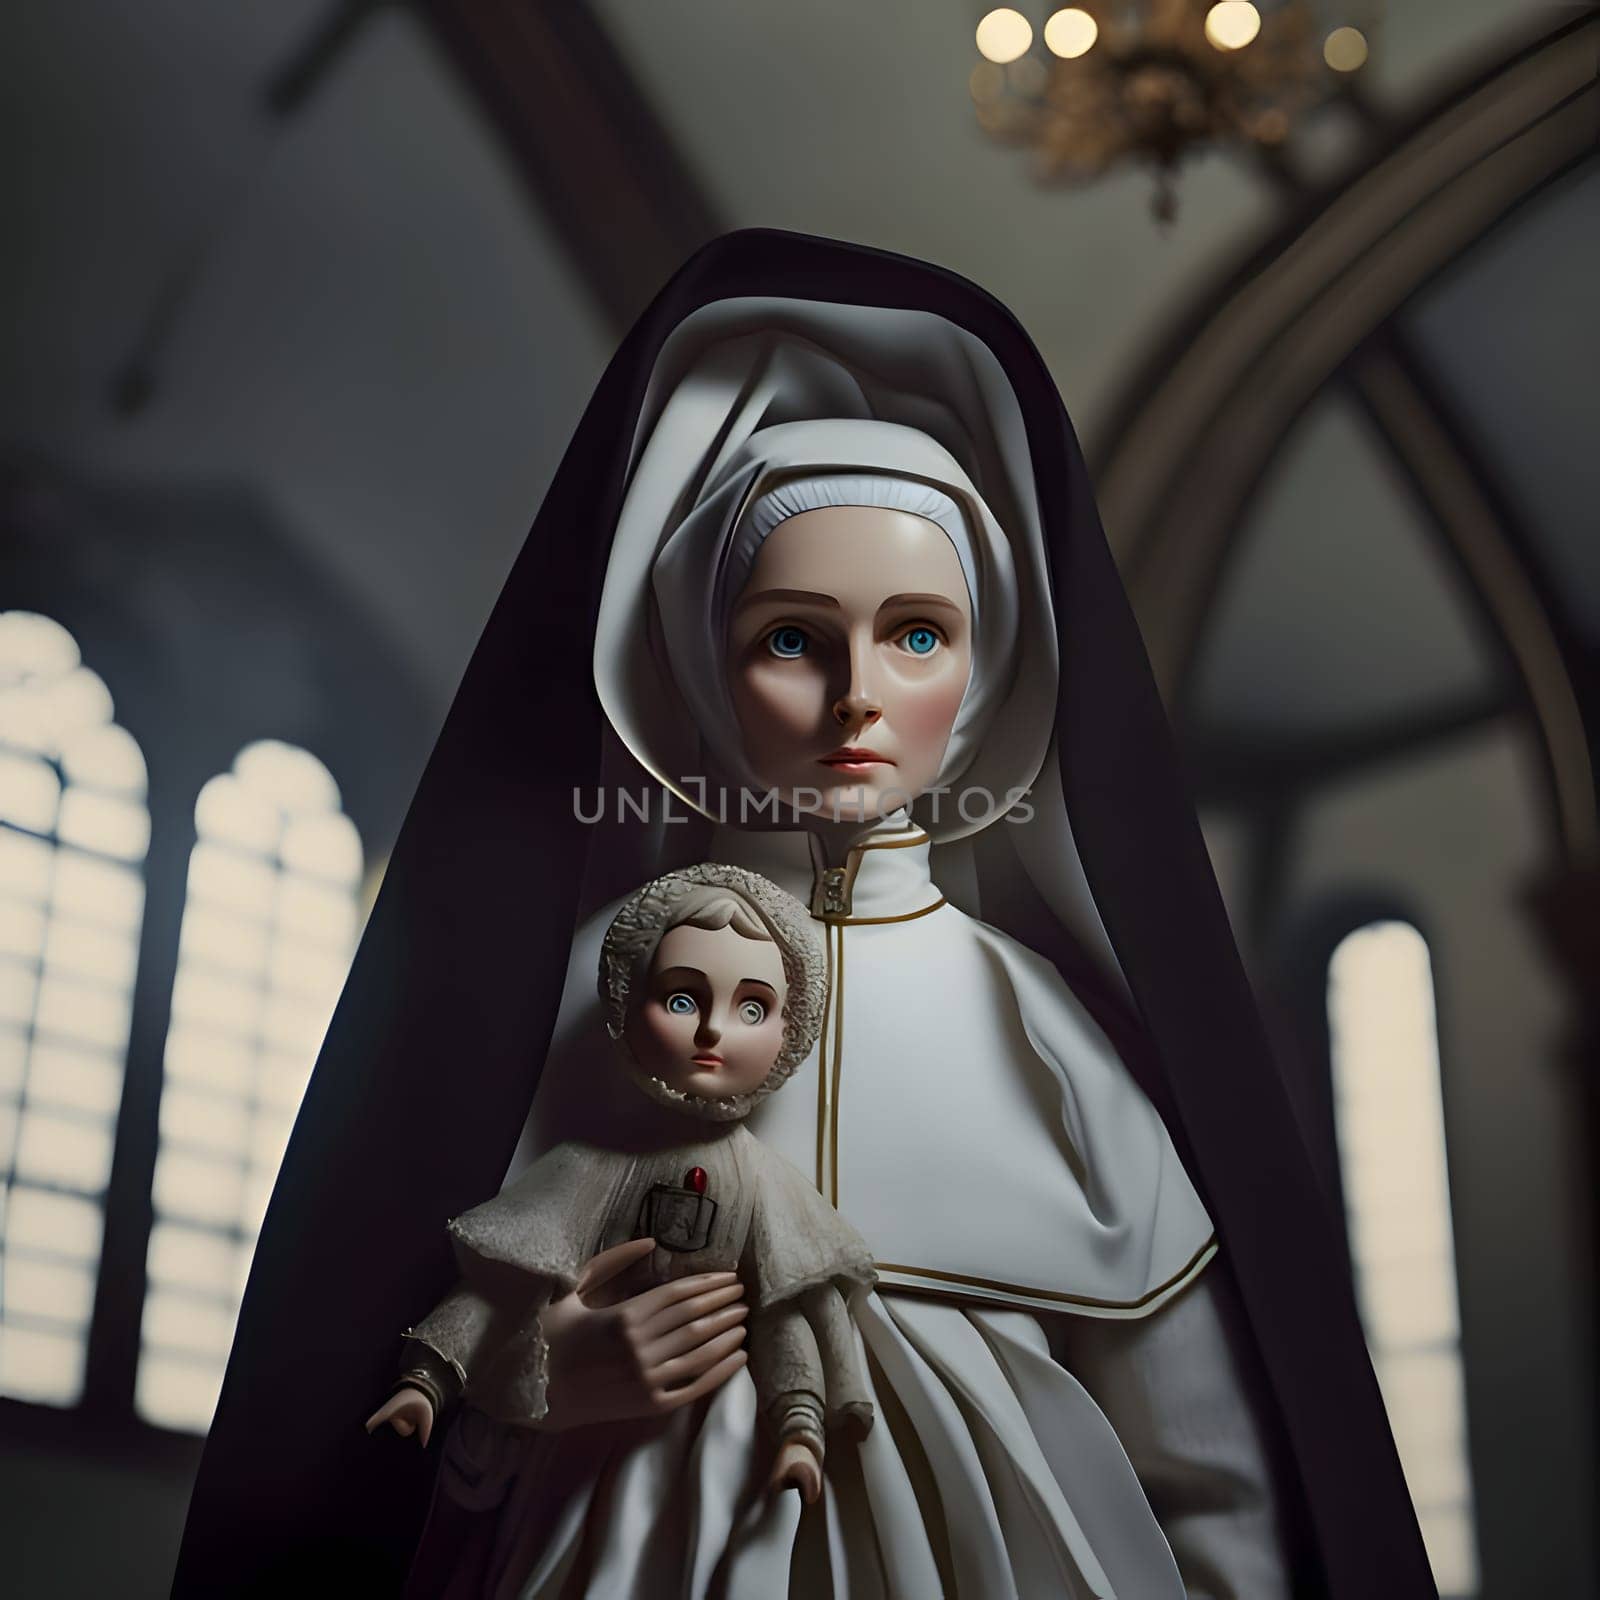 A serene nun doll lovingly cradles a child in her arms, standing near the convent windows, radiating warmth and compassion in their peaceful surroundings.